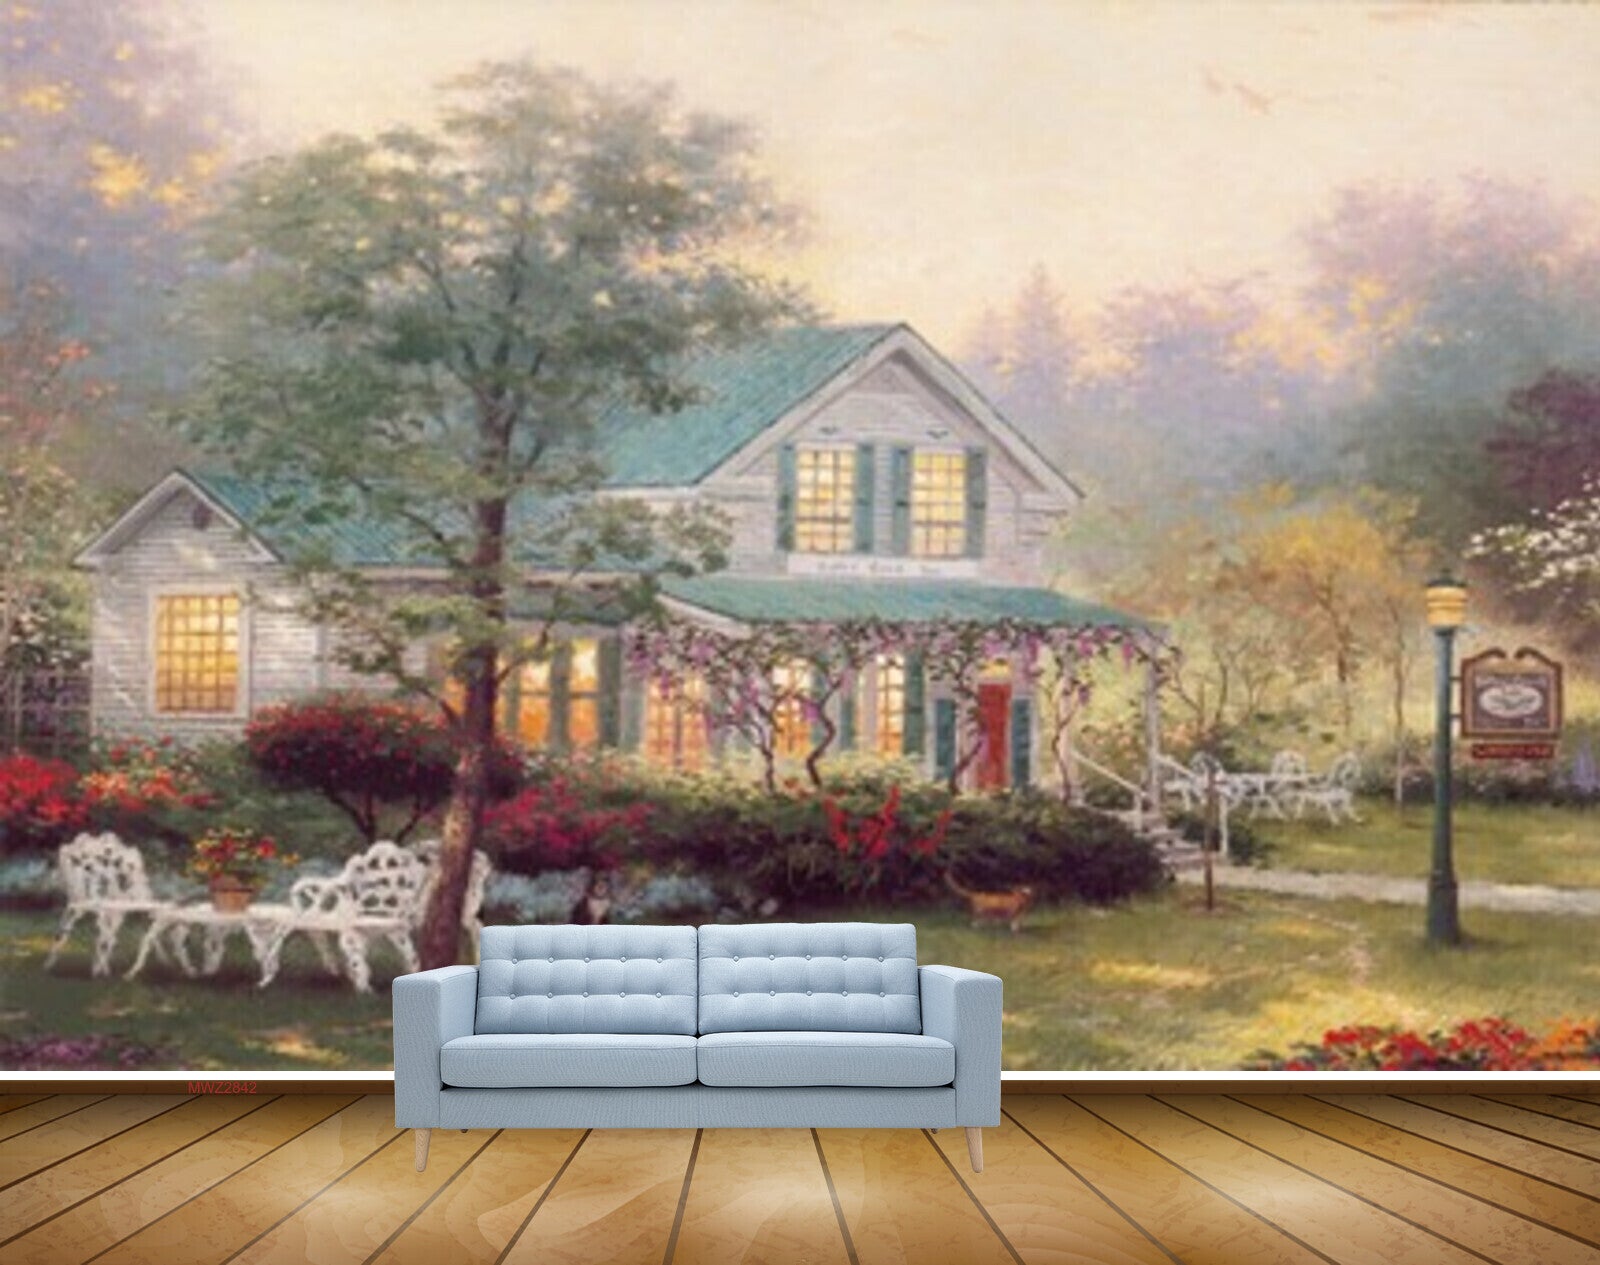 Avikalp MWZ2842 Trees Houses Dogs Cat Table Chairs Lamps Clouds Grass Garden Flowers Lamps Painting HD Wallpaper